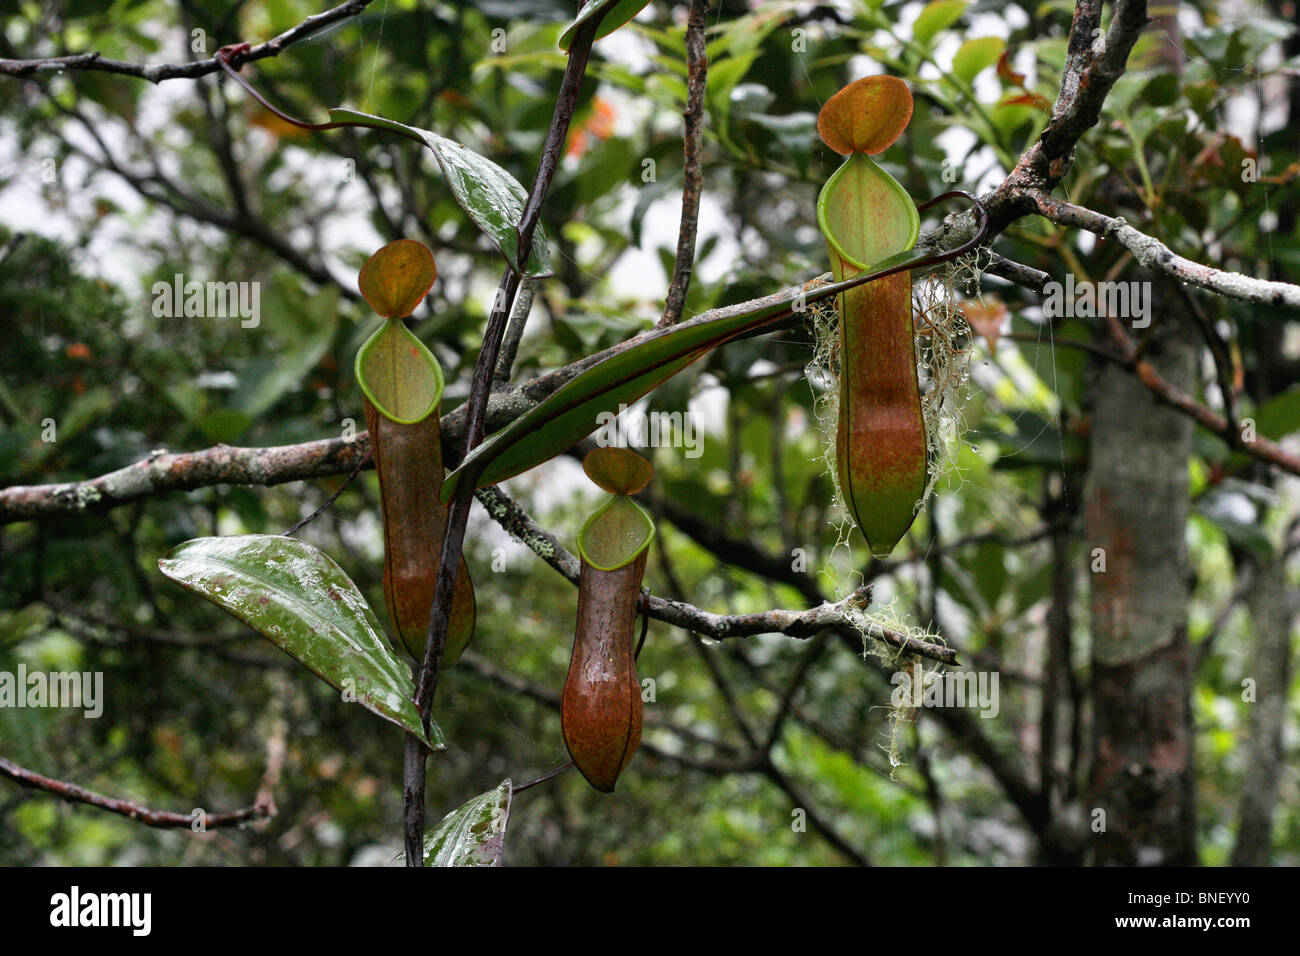 Aerial Pitcher of Pitcher Plant, Nepenthes Tentaculata, Mount Kinabalu, Malaysia Stock Photo